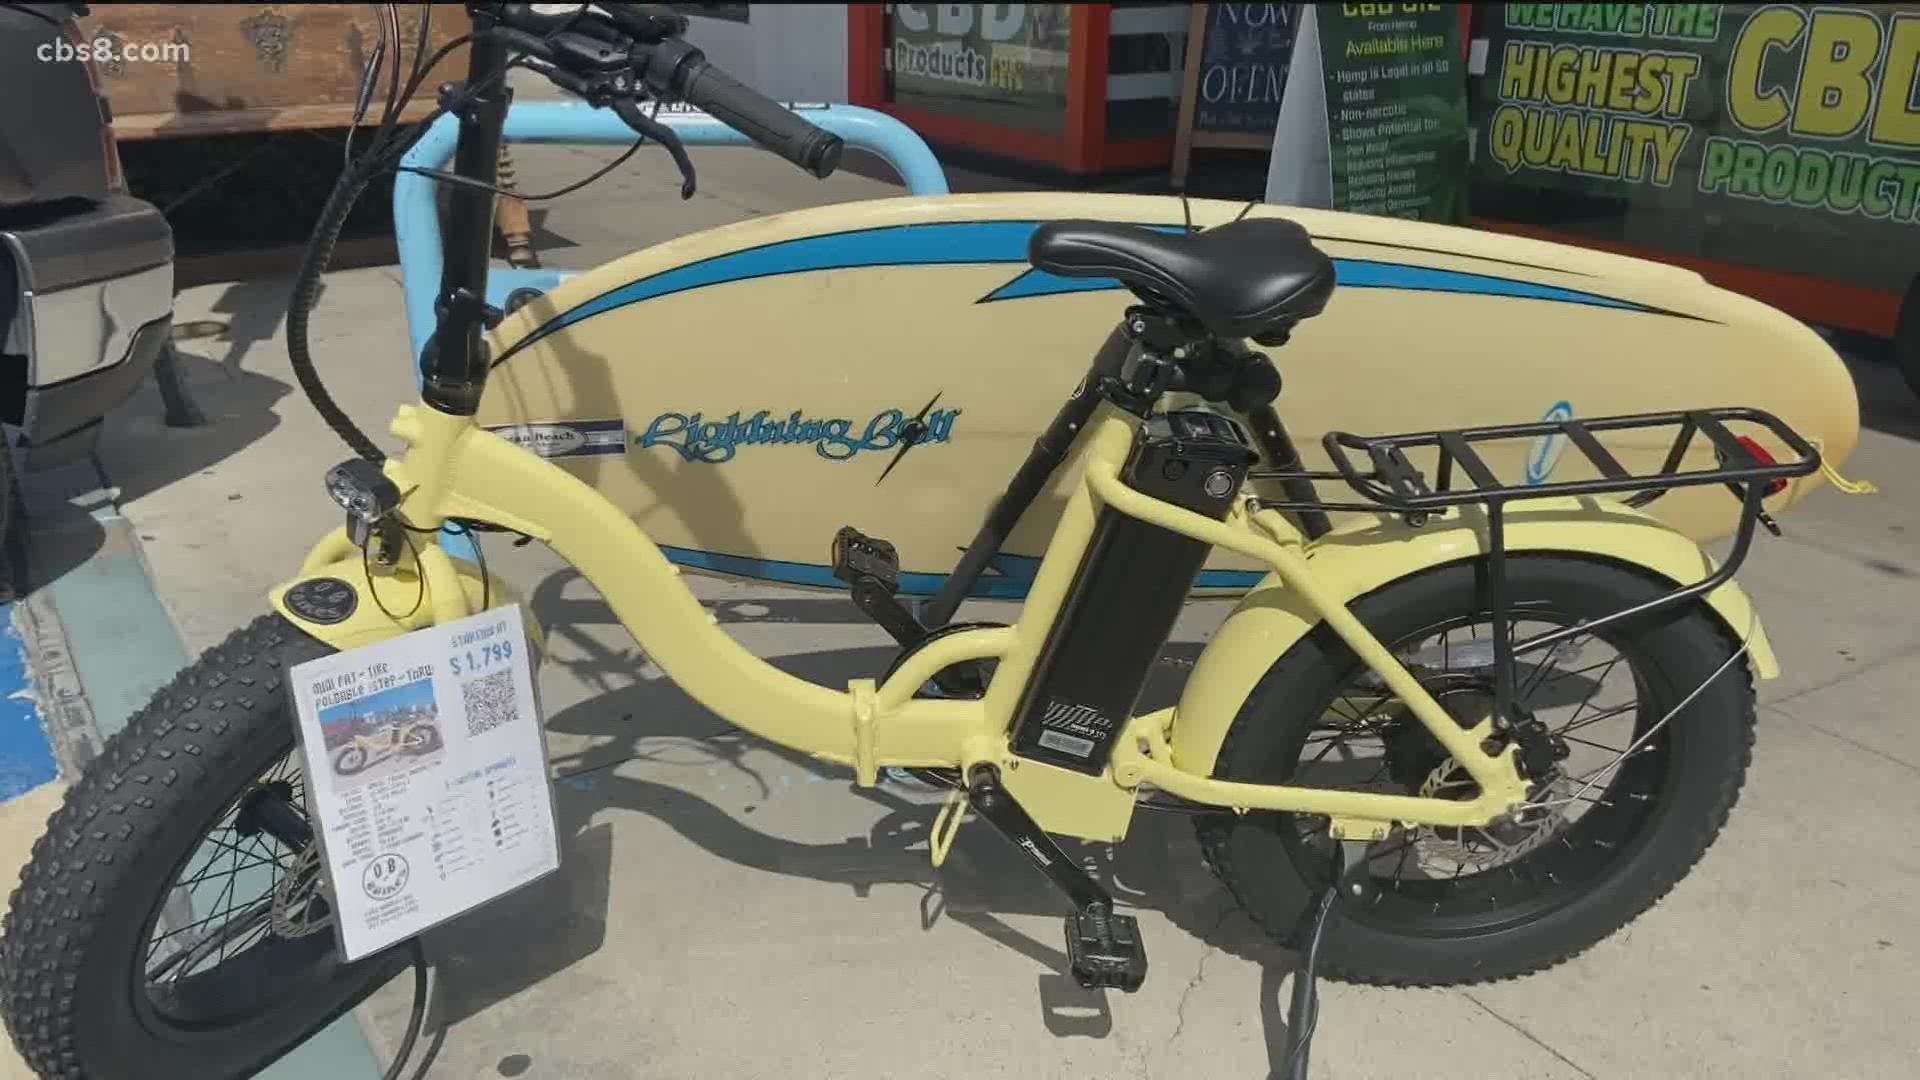 "I love it! It's good for business! Nobody likes to pay high gas prices," said OB E-Bike shop owner, Bill Connard.